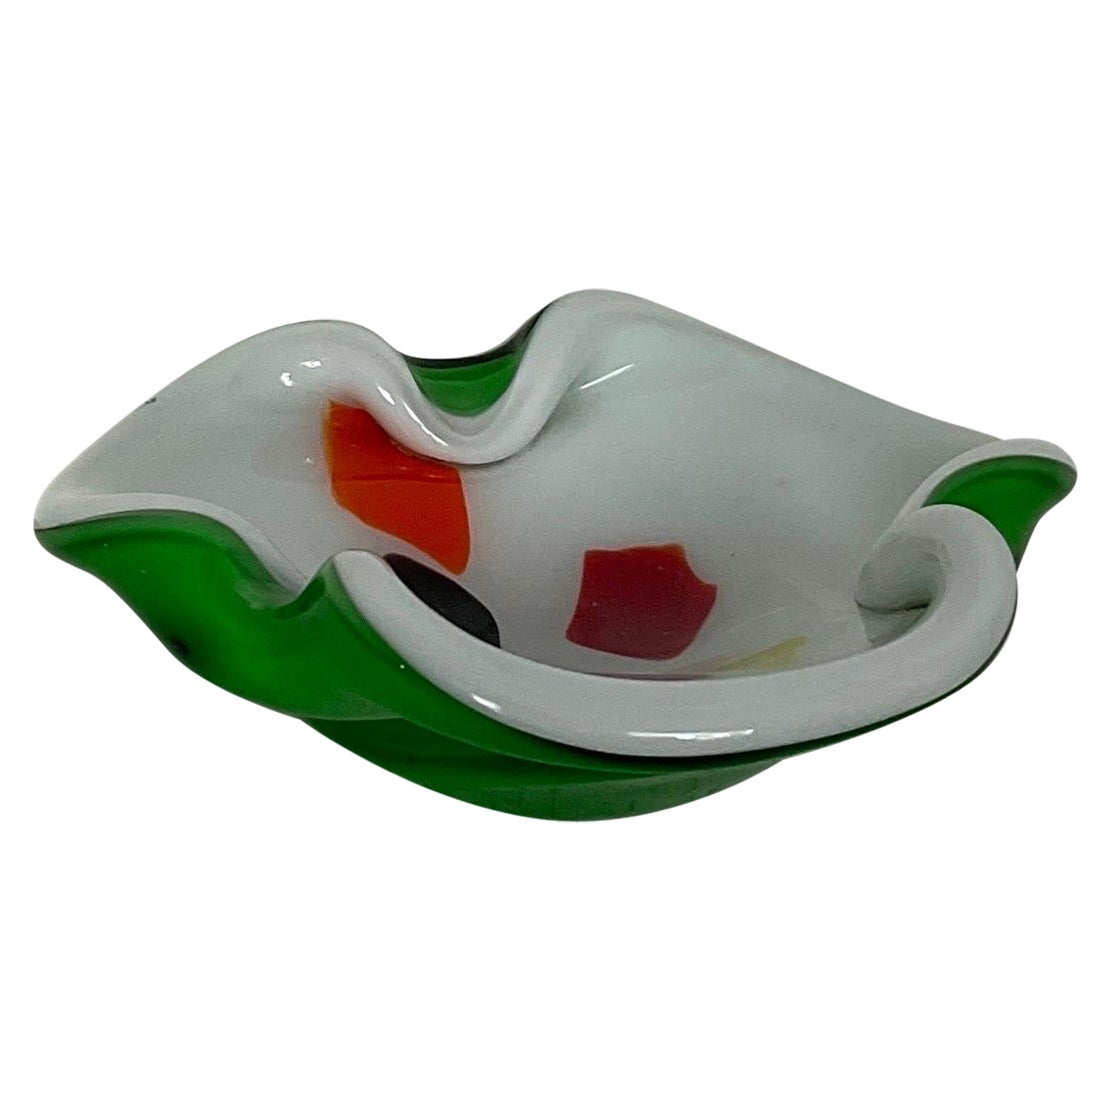 Murano glass ashtray attributable to Archimedes Seguso of the 60s For Sale